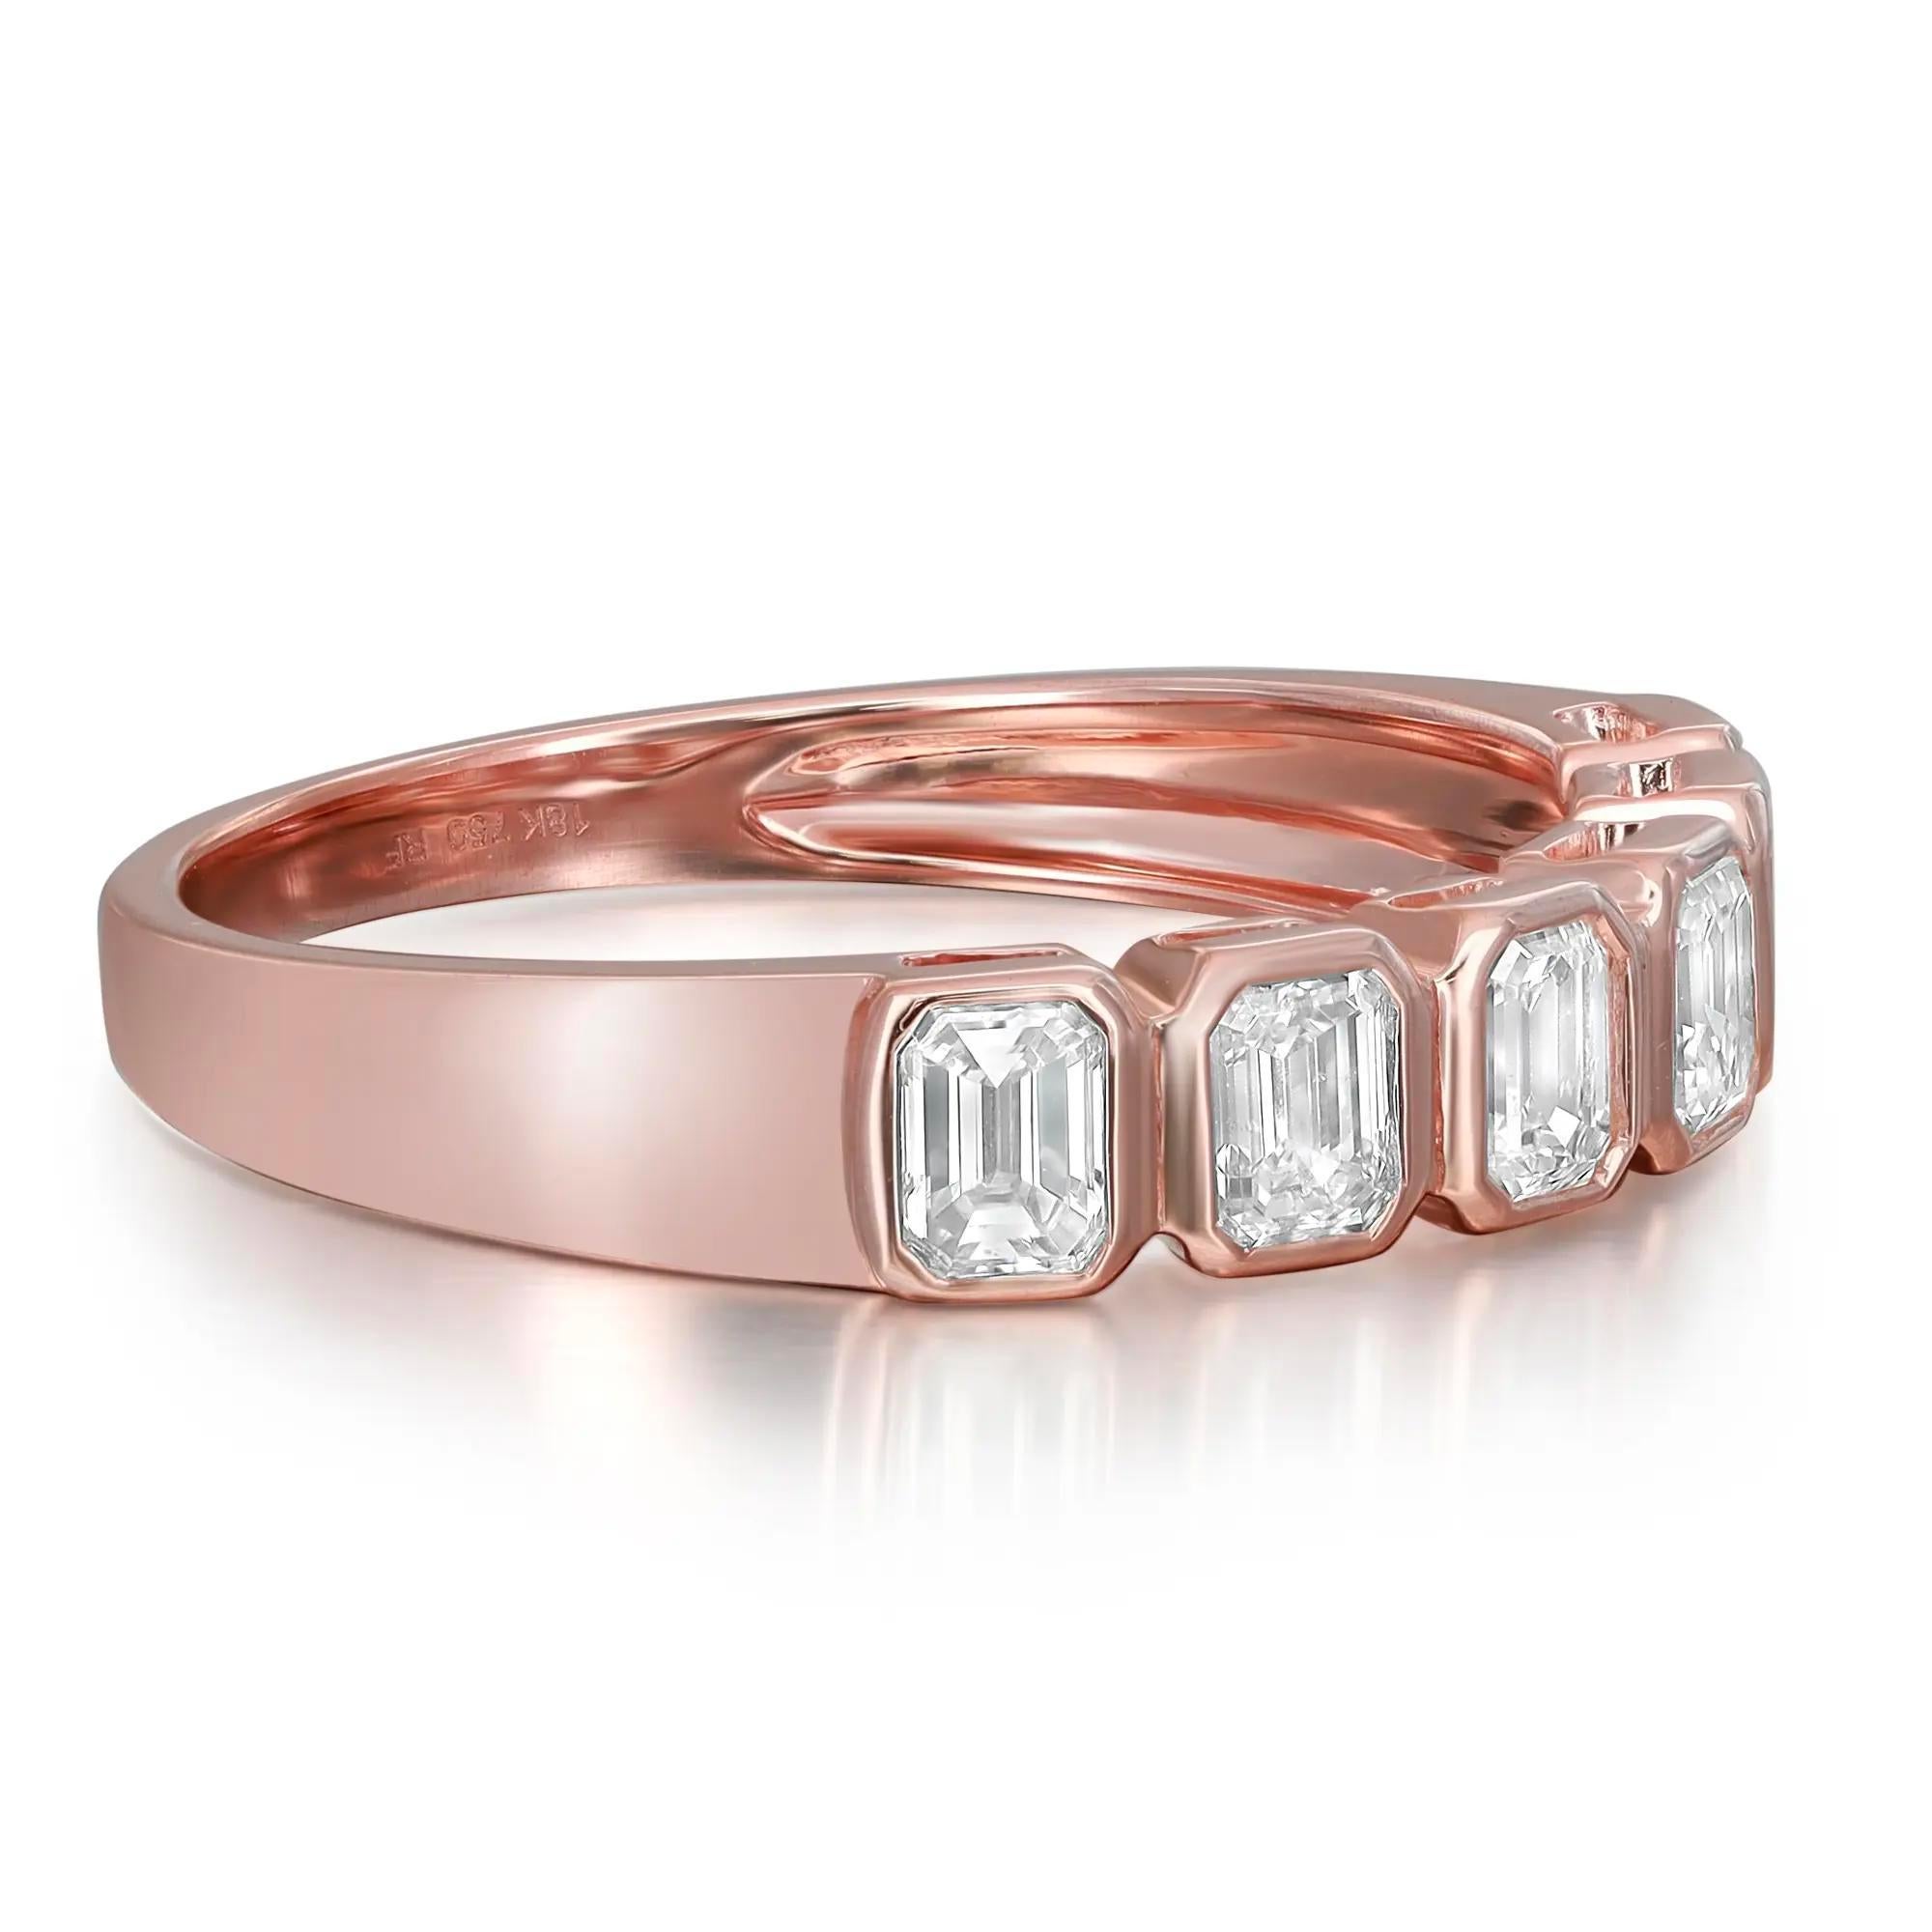 0.90cttw Bezel Set Emerald Cut Diamond Eternity Band Ring 18k Rose Gold In New Condition For Sale In New York, NY